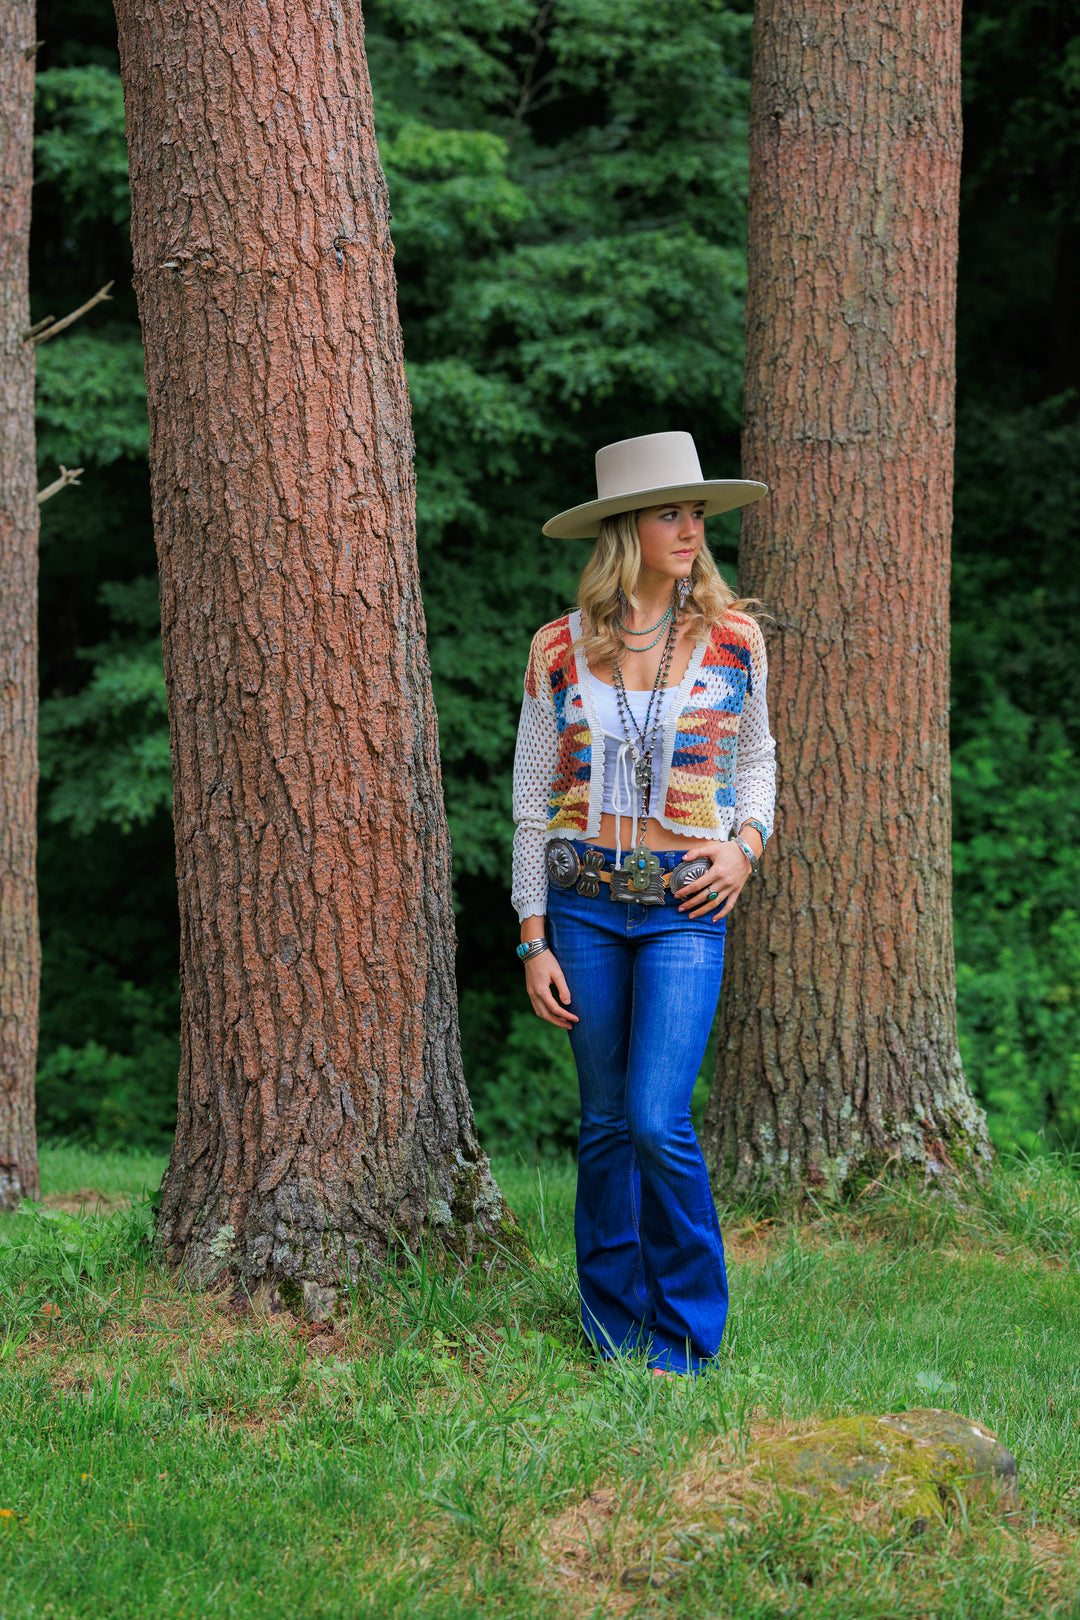 Womens Western Wear Clothing From West 20 – West 20 Saddle Co.